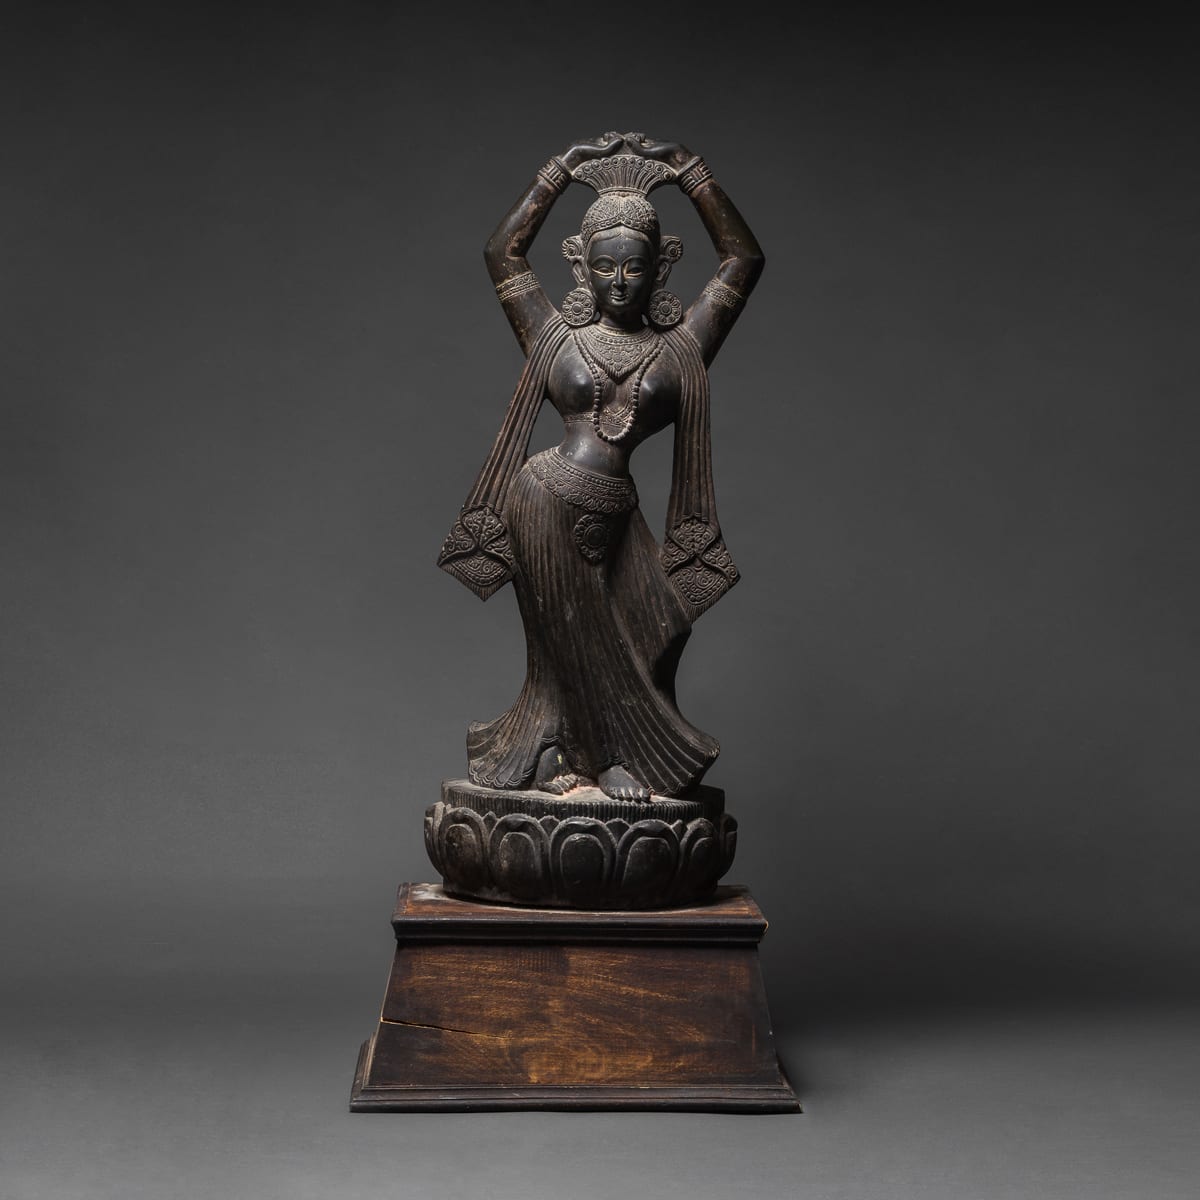 Stone statuette of a Yakshi, 12th Century CE - 16th Century CE ...